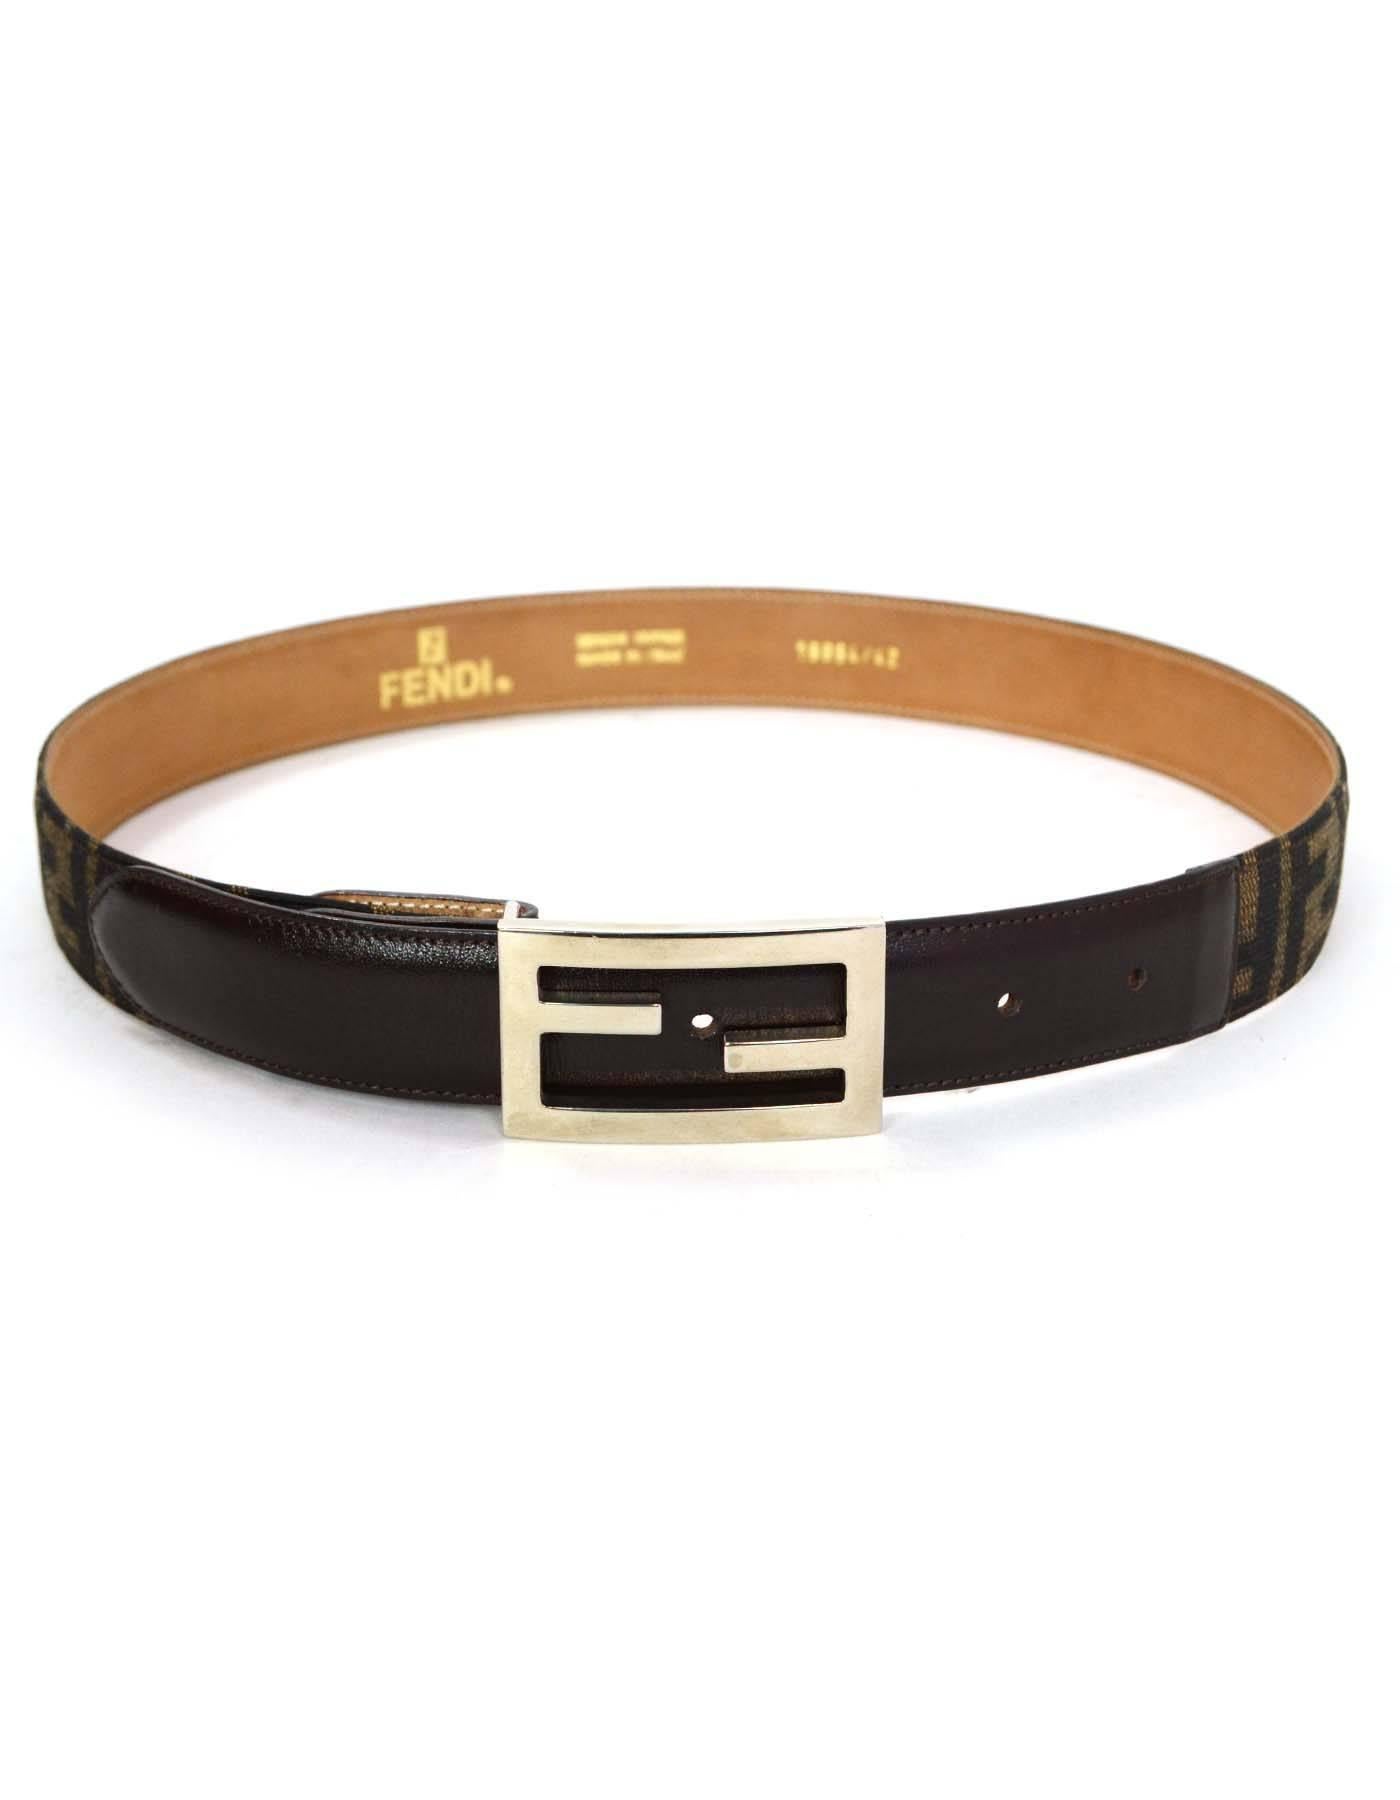 Fendi Brown & Canvas Zucca Print Belt
Features Fendi silvertone logo buckle
Made In: Italy
Color: Brown
Hardware: Silvertone
Materials: Leather and canvas
Closure/Opening: Stud and notch closure
Stamp: 15654/42
Overall Condition: Excellent